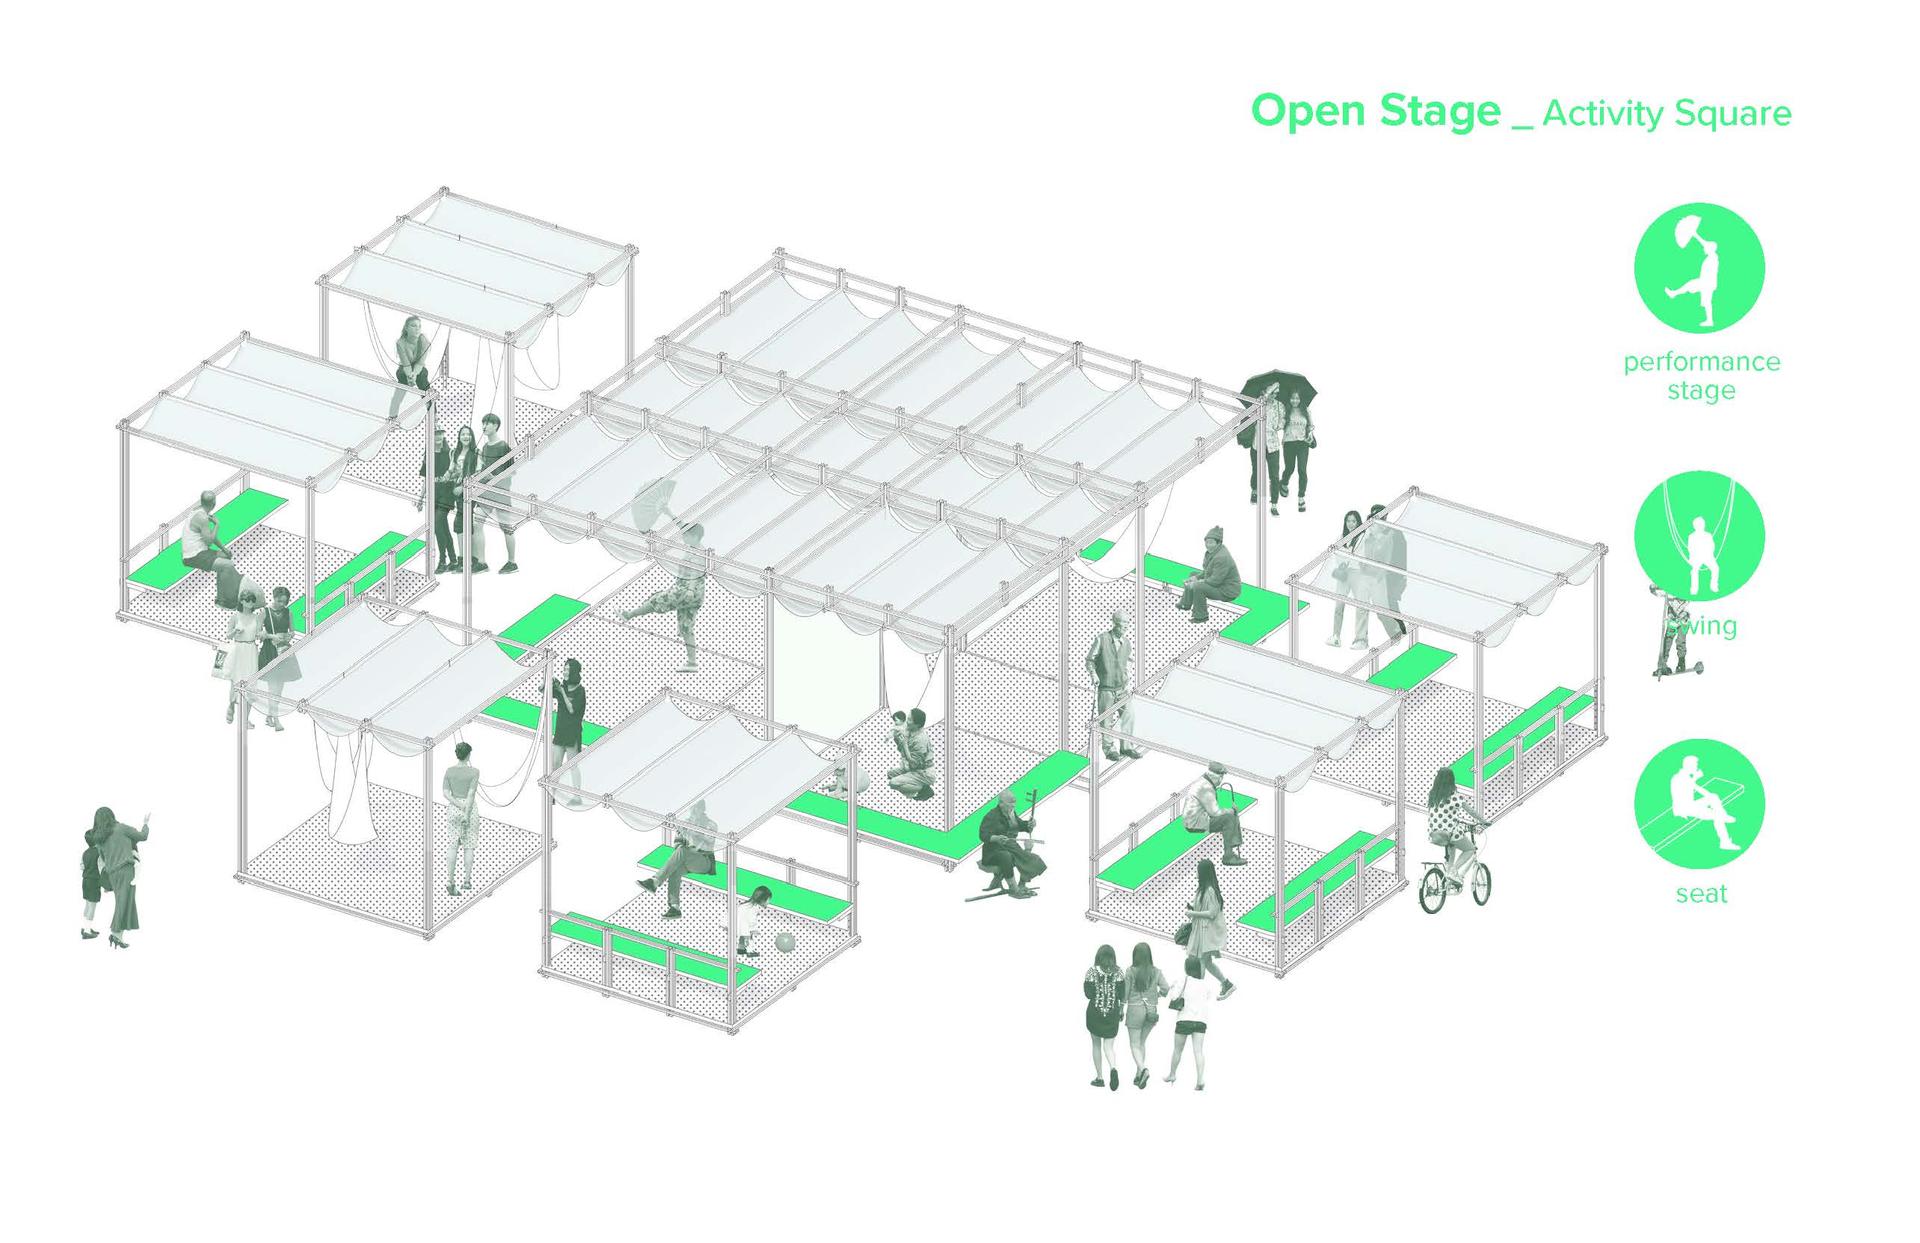 OPEN STAGE _ ACTIVITY SPACE